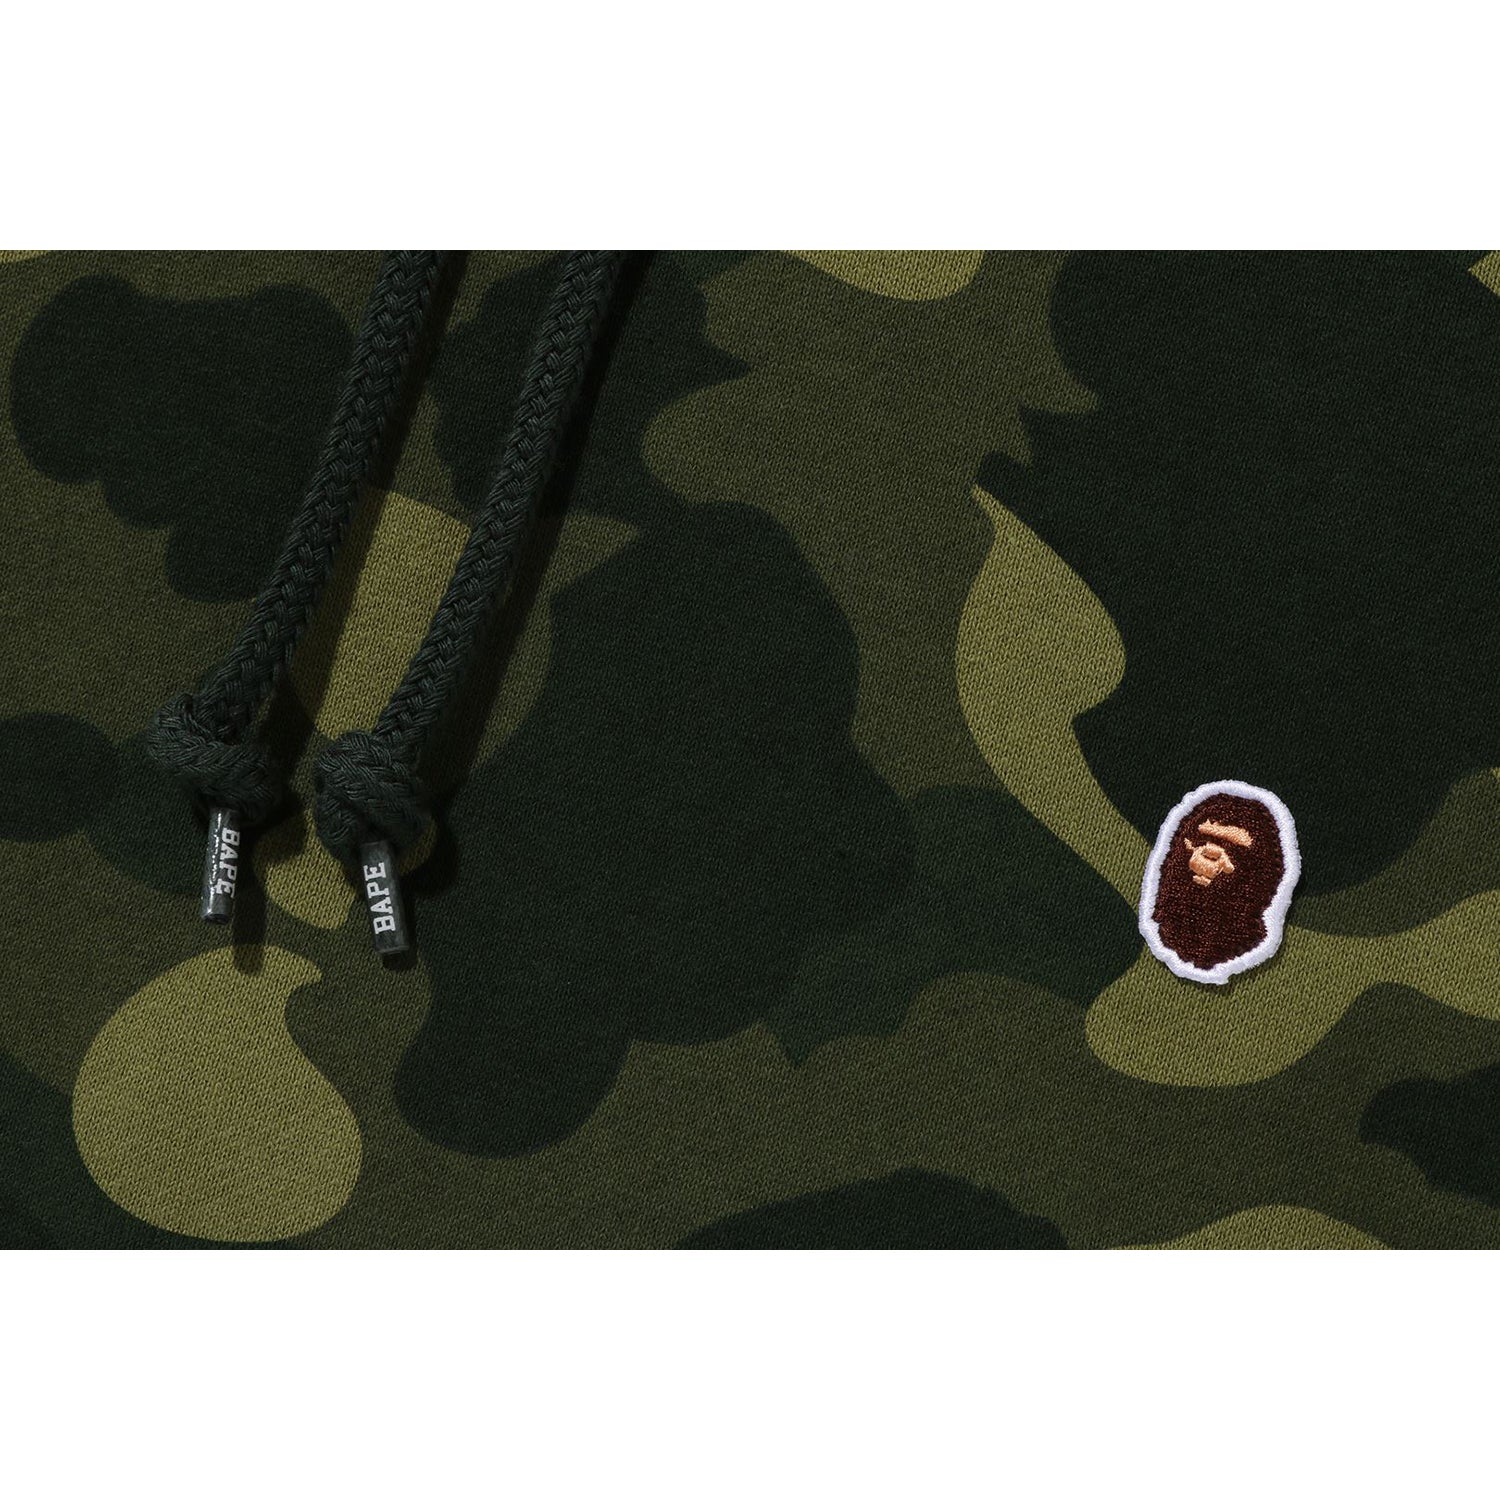 BAPE 1st Camo One Point Pullover Hoodie Green